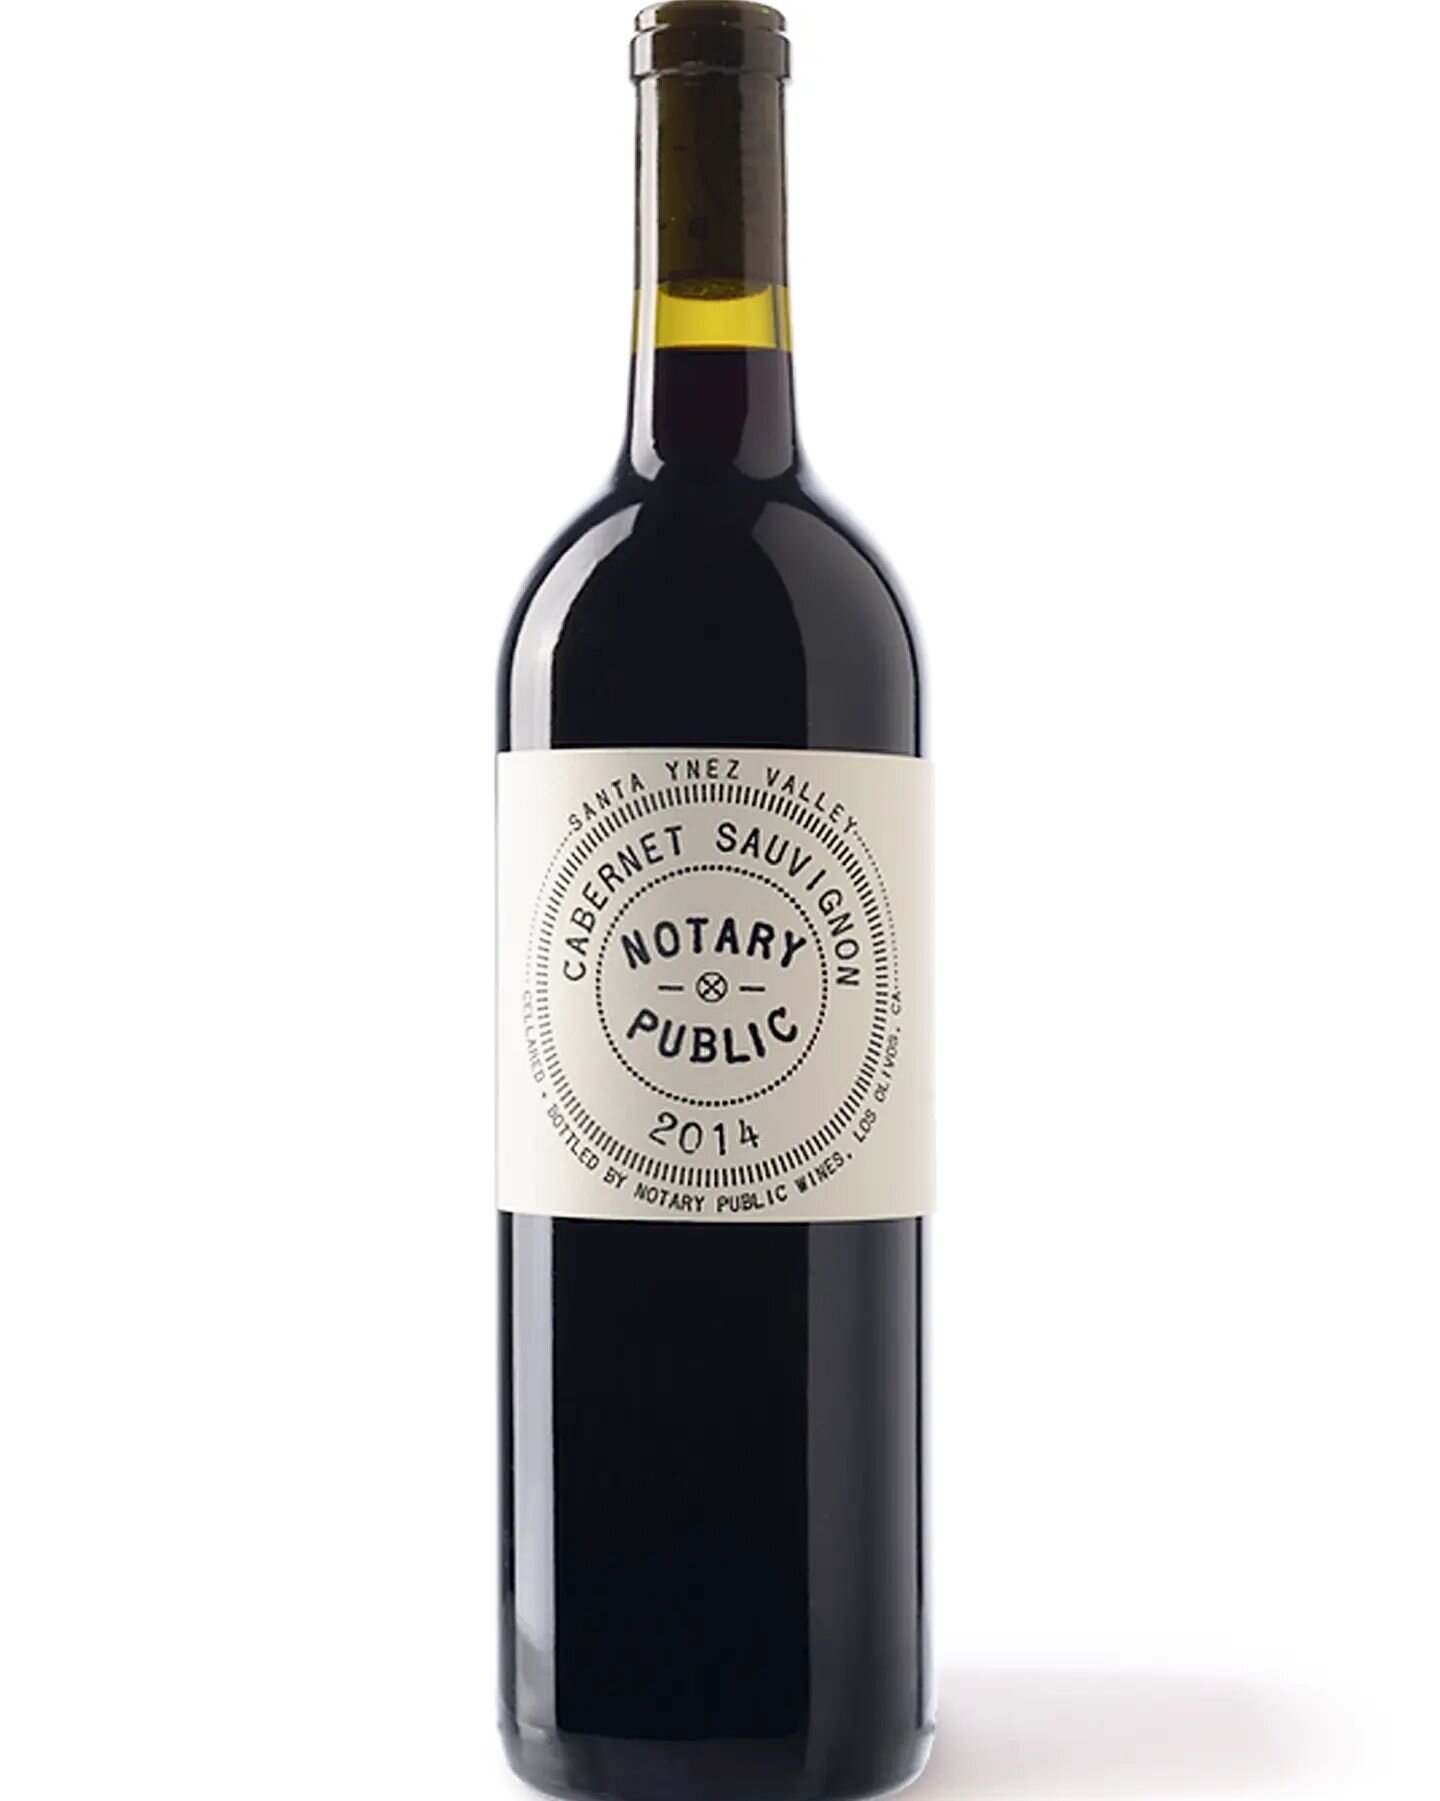 Notary Public Cabernet Sauvignon
New Vintage - 2017
NOW BACK IN STOCK!

This has been one of our most popular wines since we began. 

Sourcing fruit from some of the oldest vines in Santa Ynez, Ballard Canyon. Ernst Storm crafts what is arguably one 